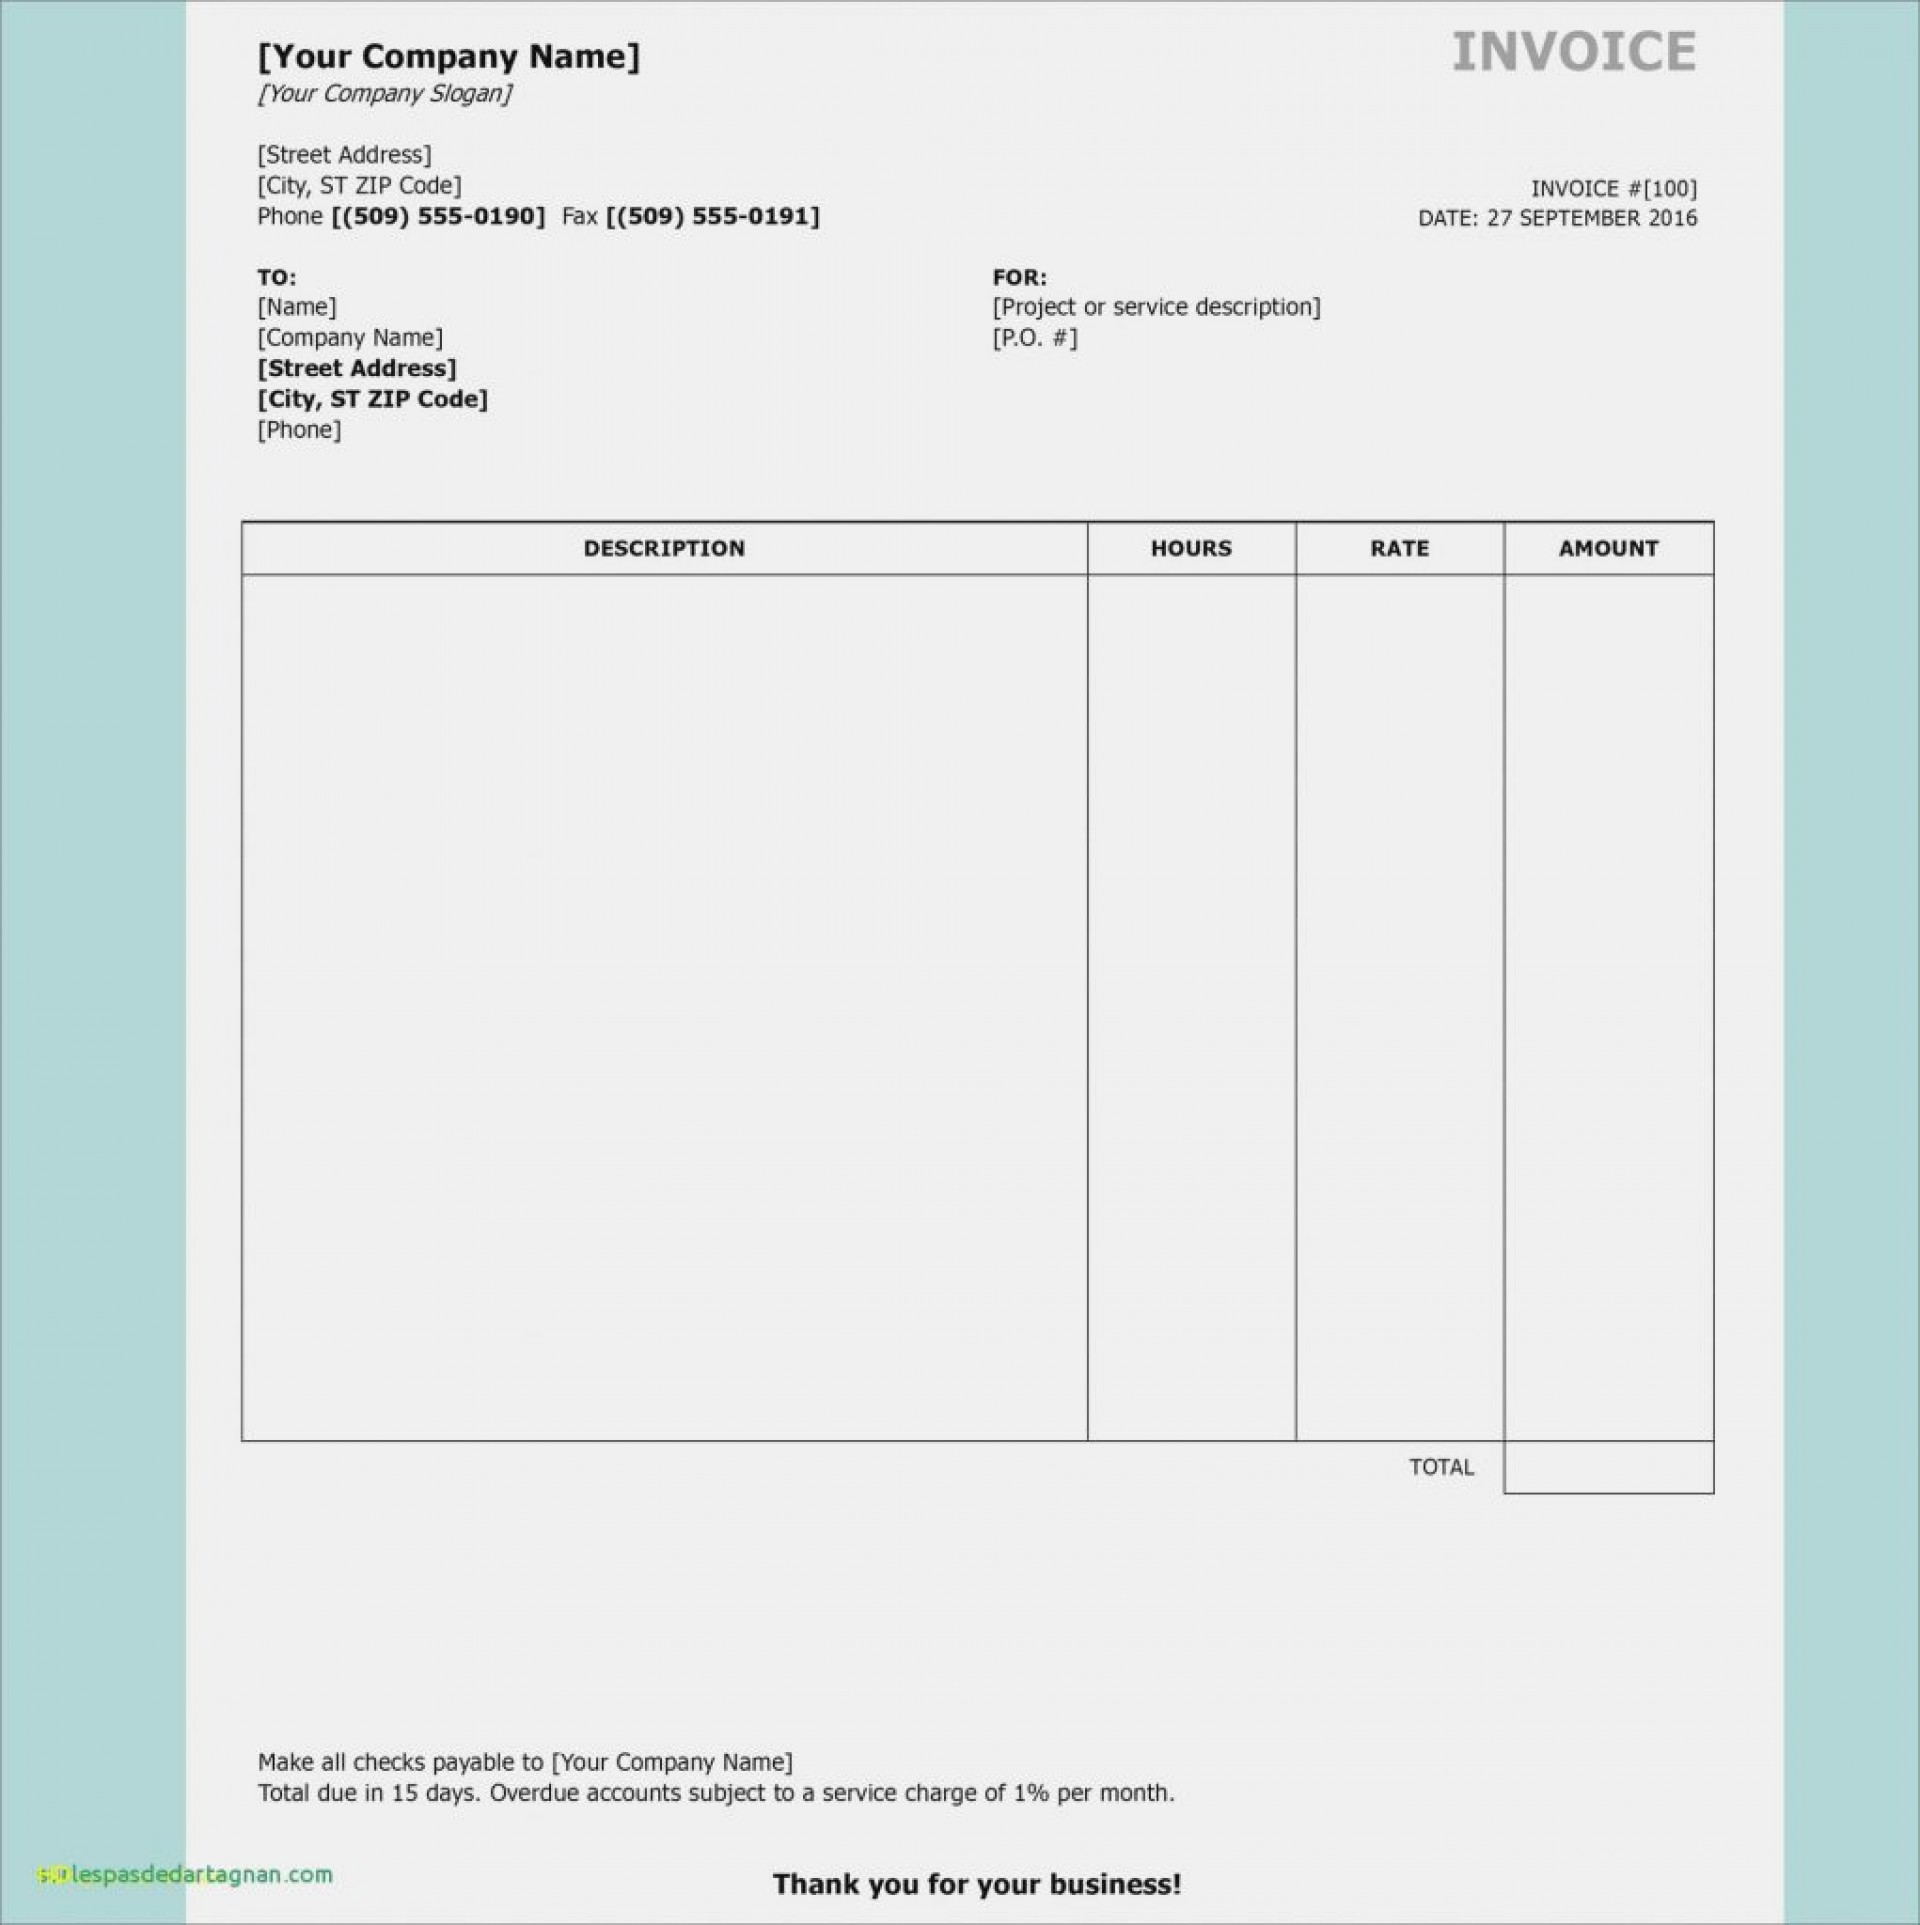 Gst Tax Invoice Tally Format In Excel Free Download Sheet Inside Download An Invoice Template